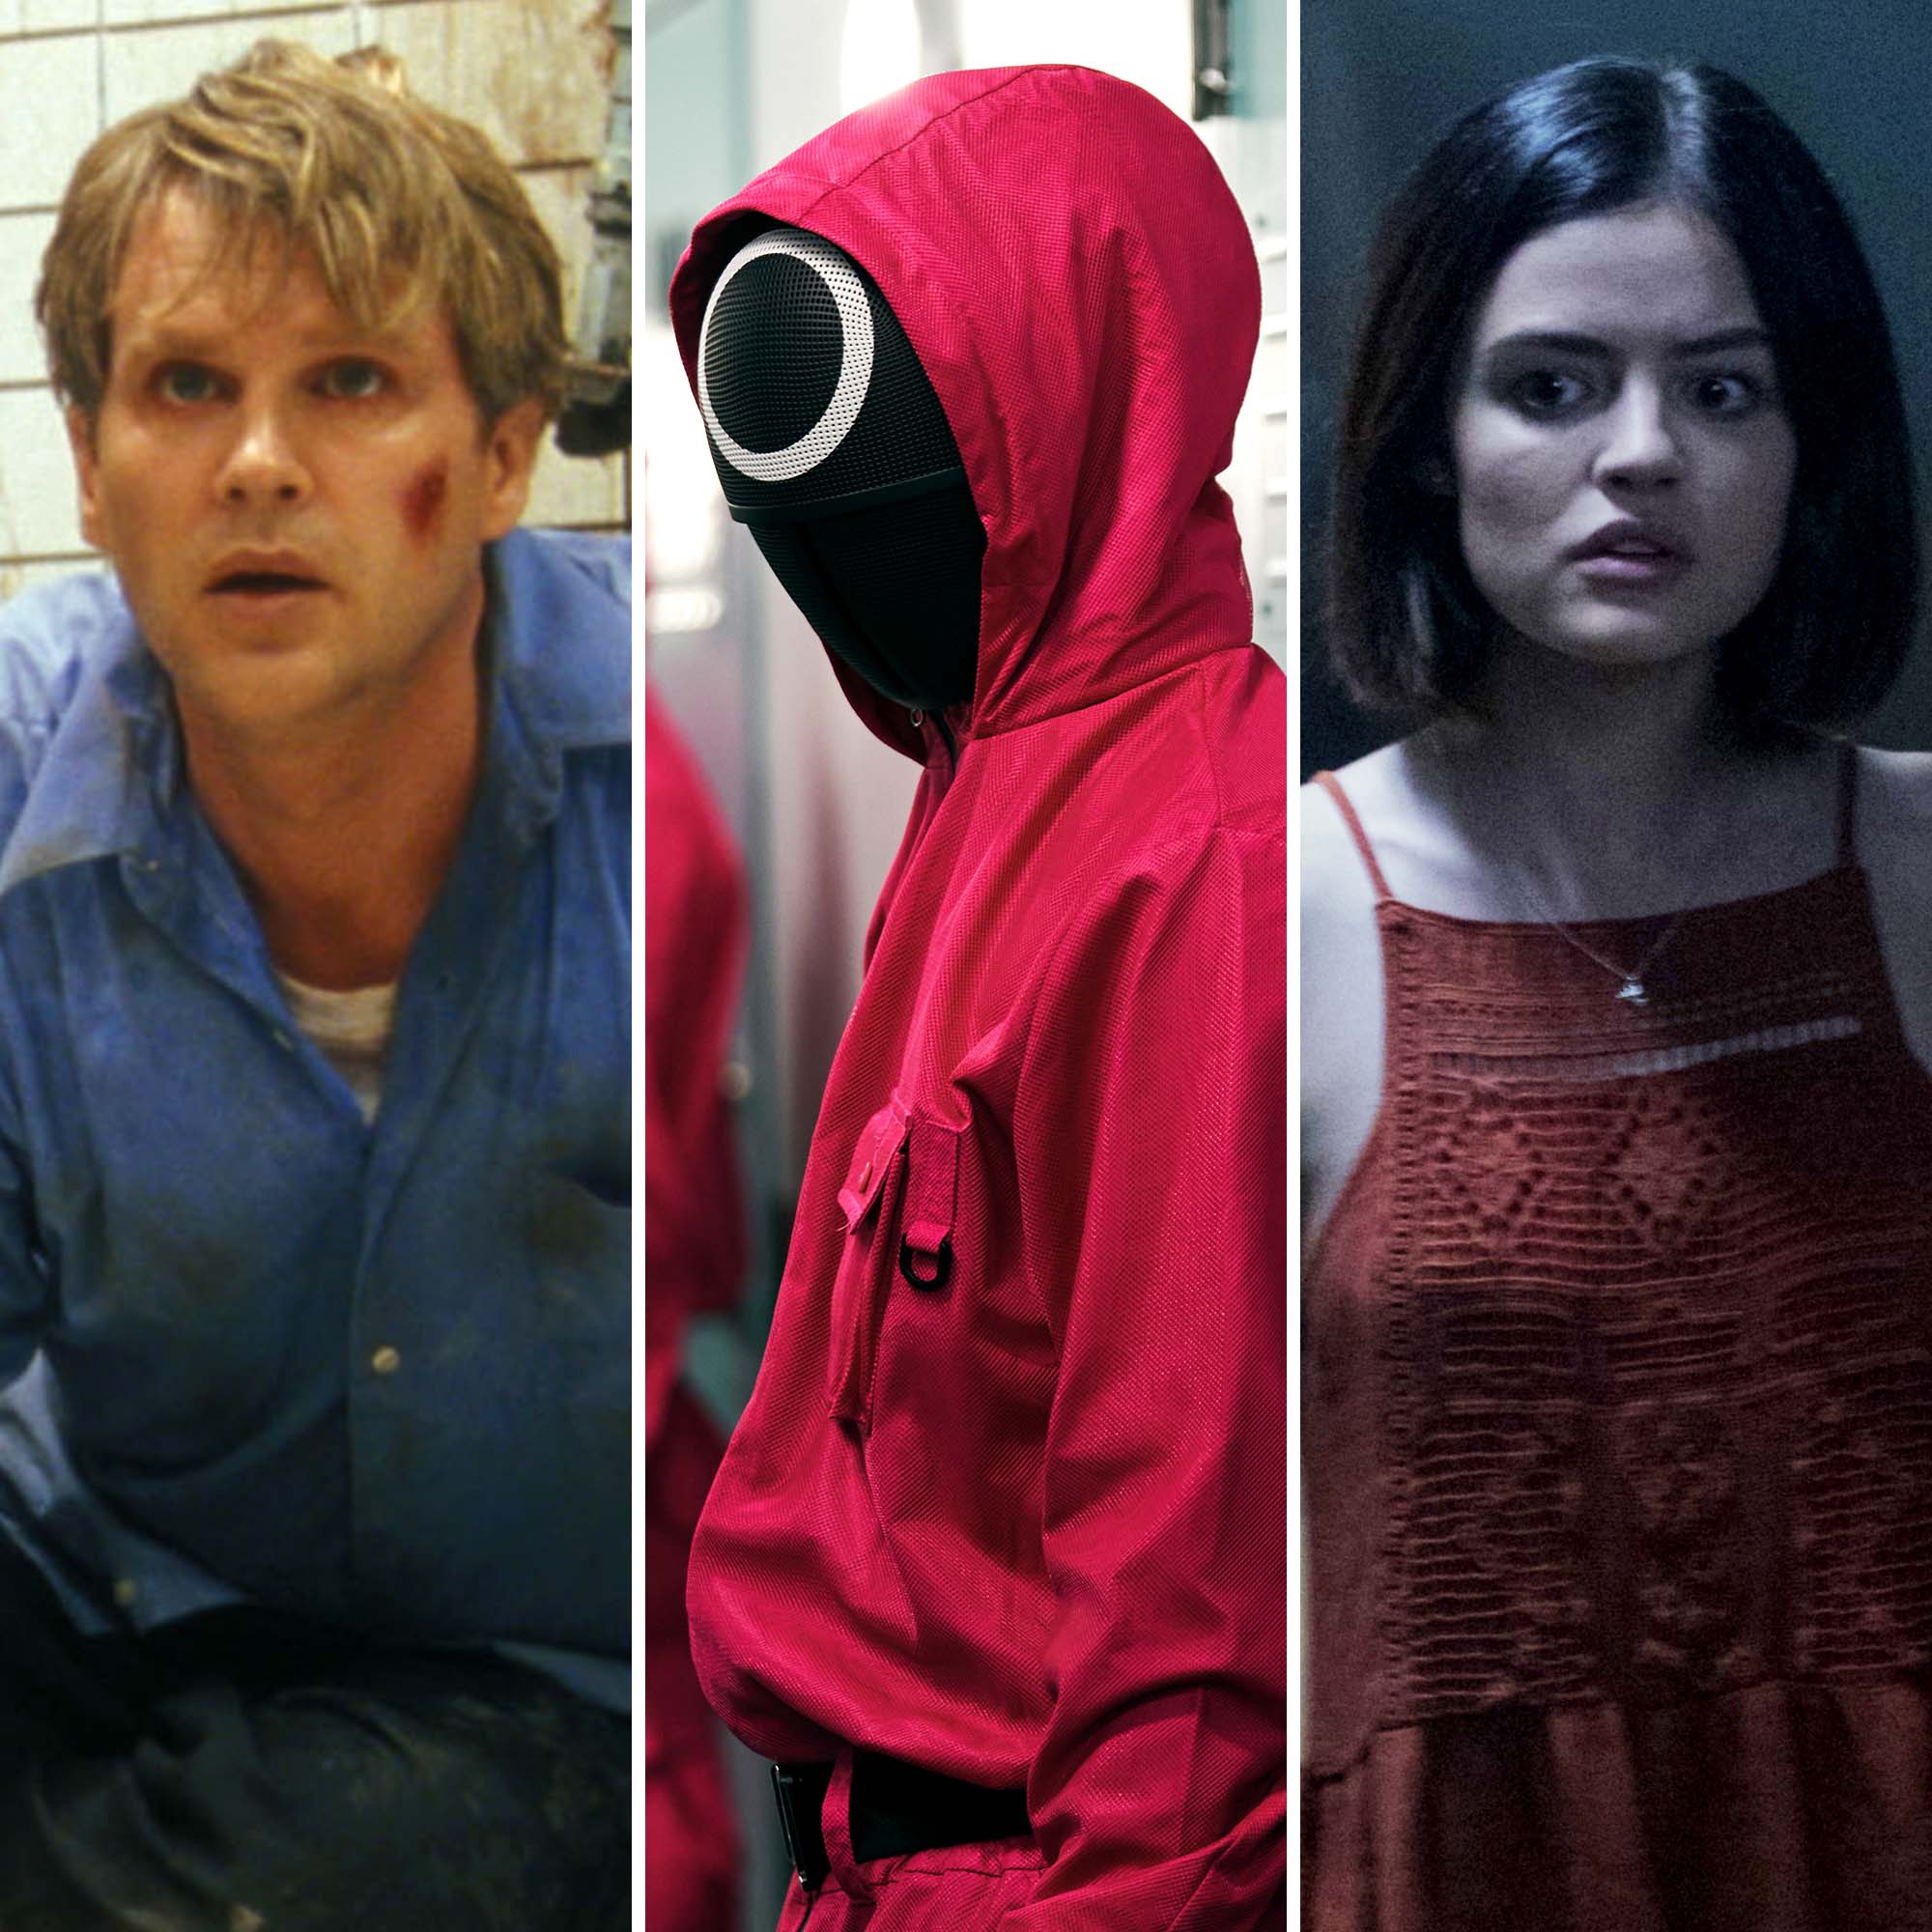 12 Intense Thriller Shows and Movies to Watch If You Like Squid